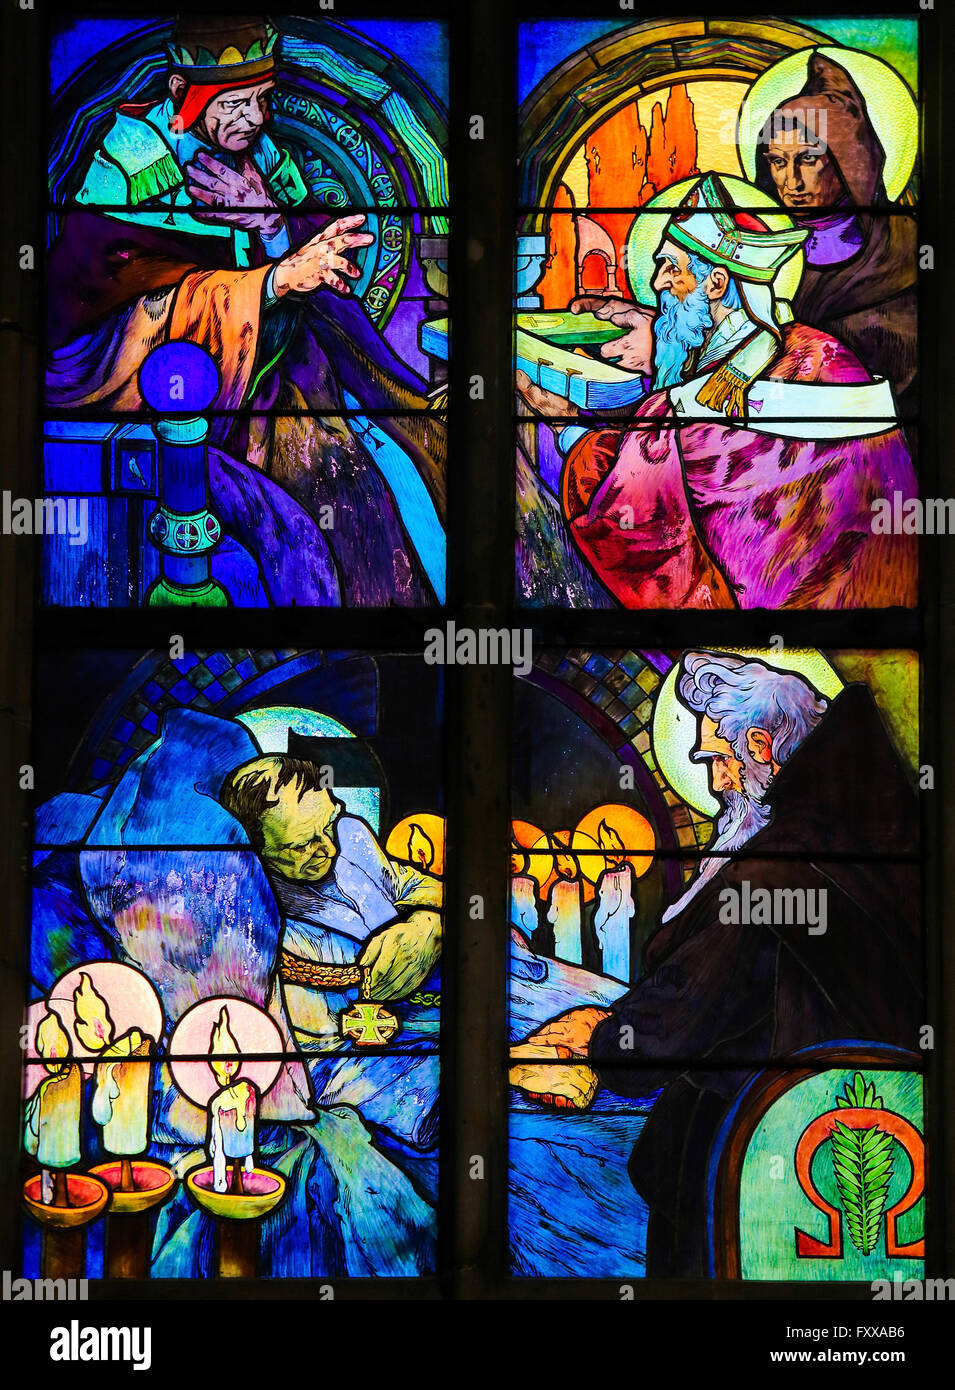 PRAGUE, CZECH REPUBLIC - APRIL 2, 2016: Stained Glass window in St. Vitus Cathedral, Prague, designed by Alphonse Mucha, depicti Stock Photo